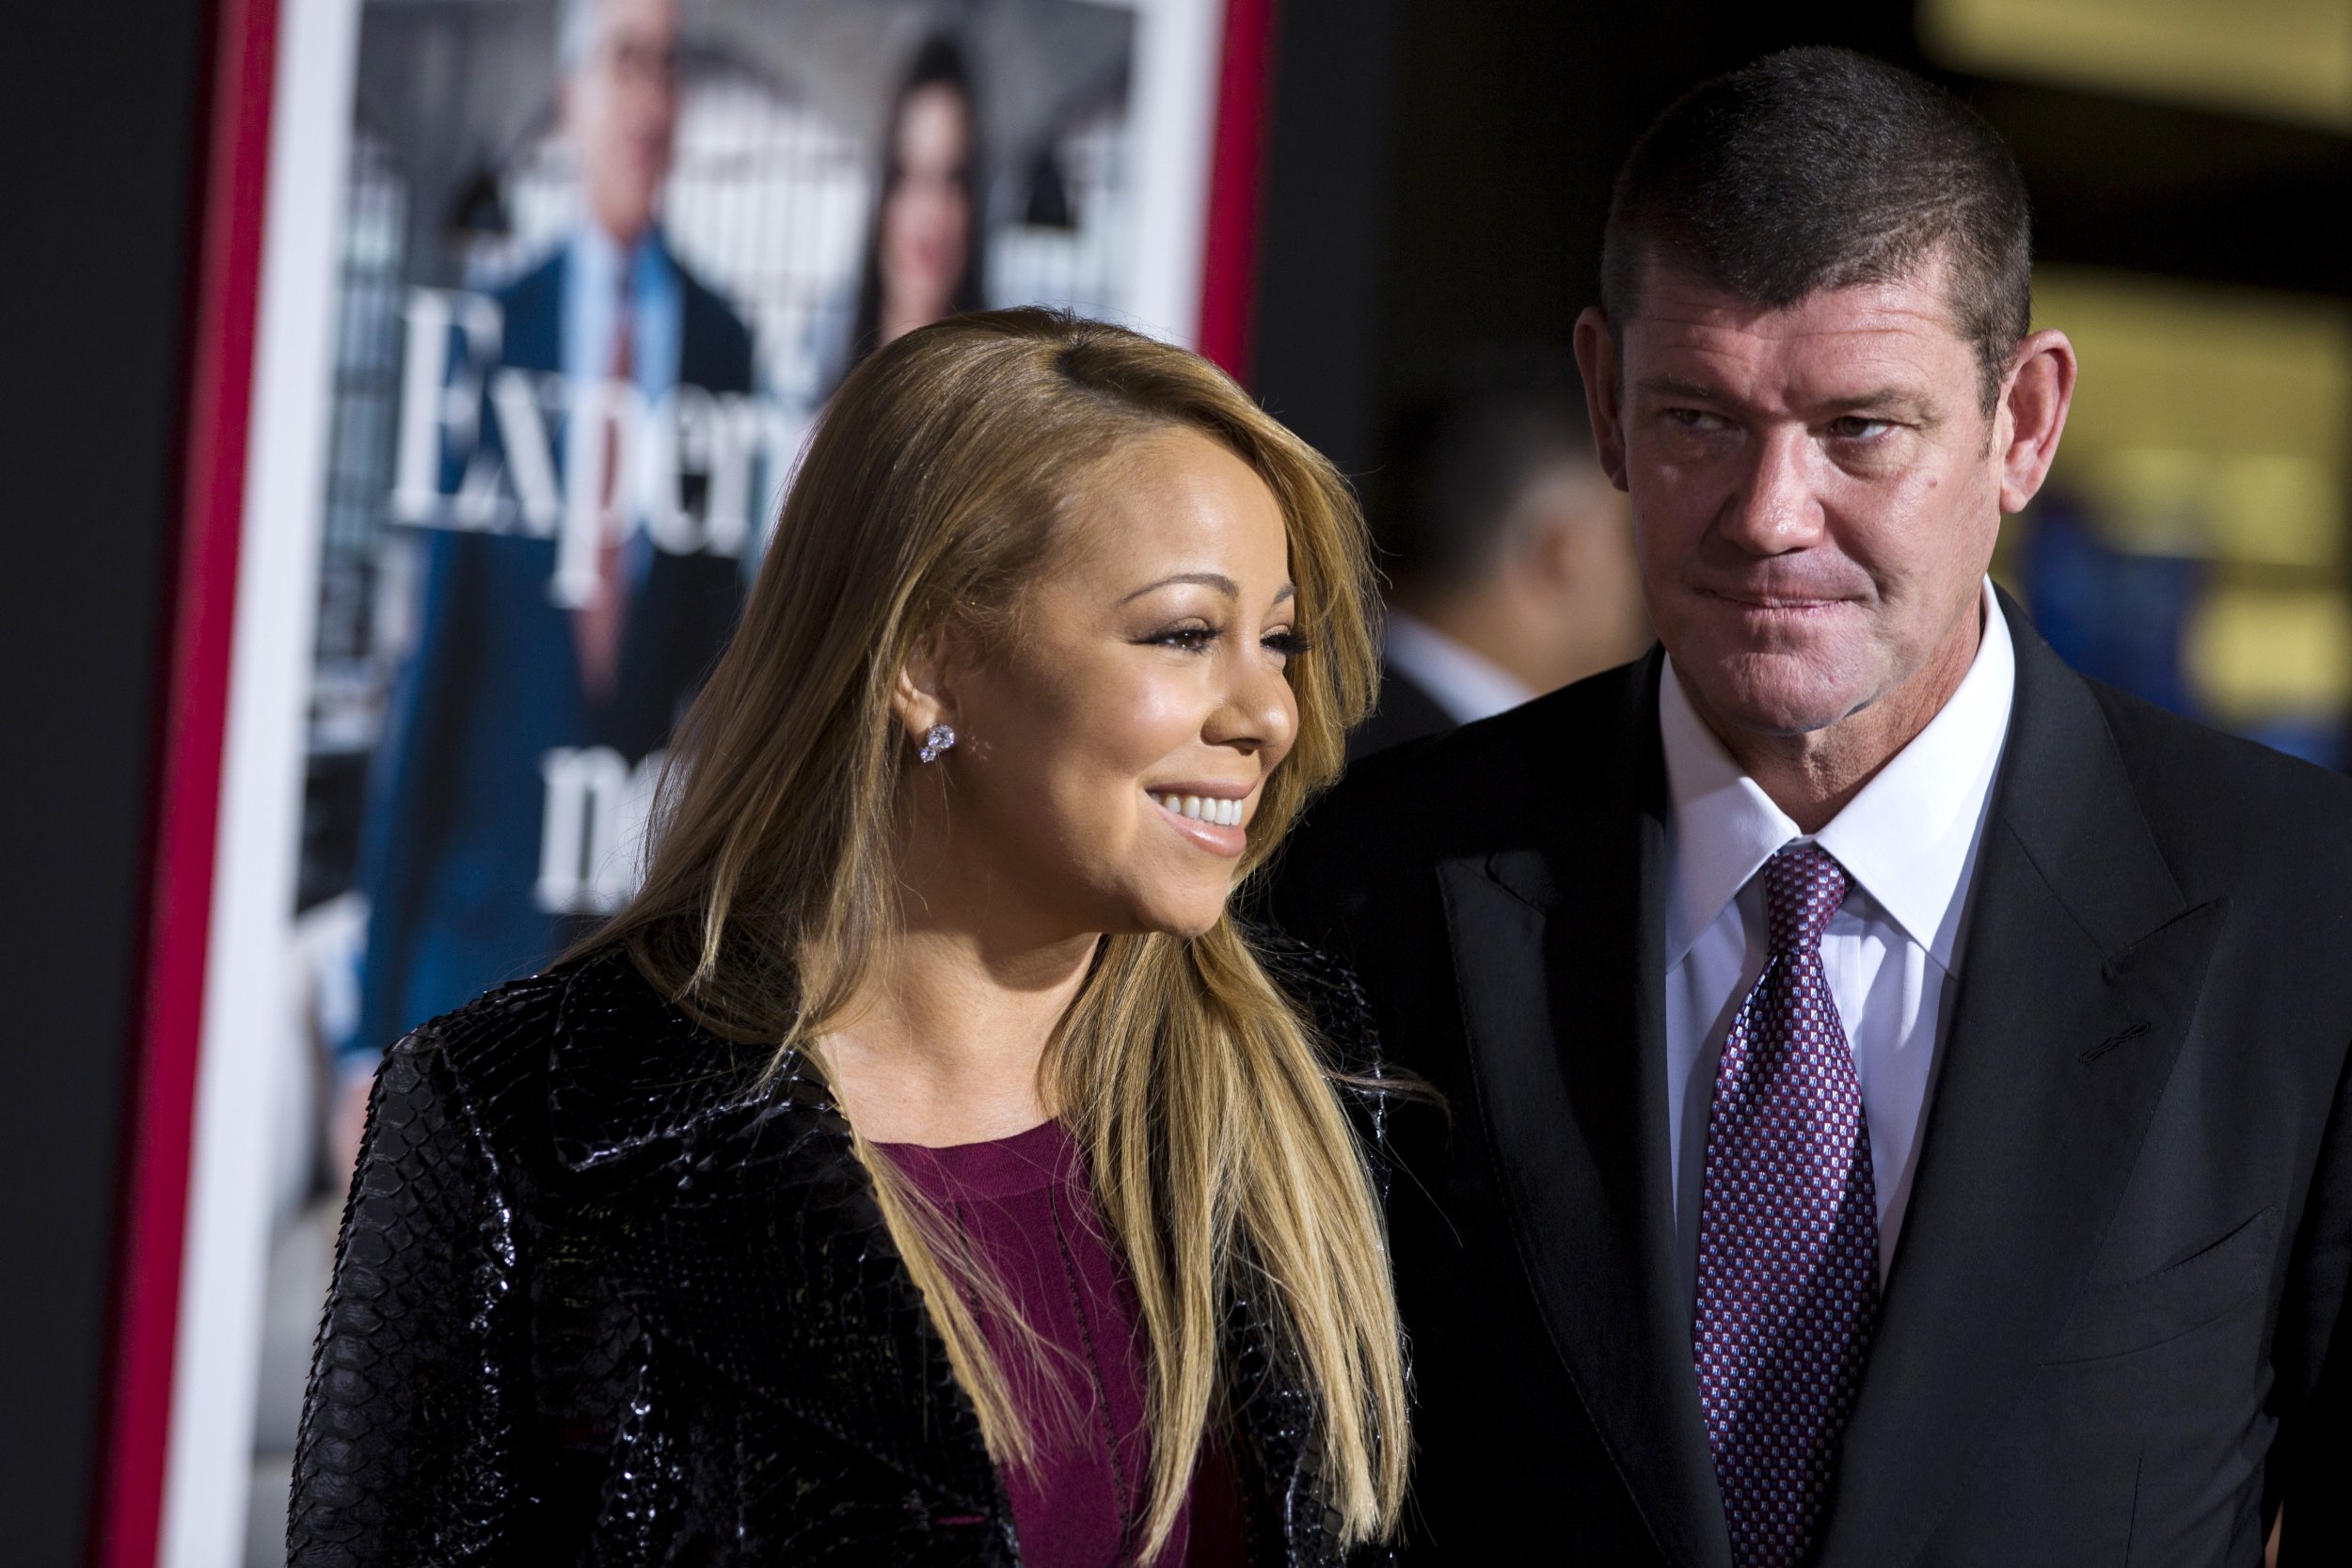 Why James Packer Really Dumped Mariah Carey